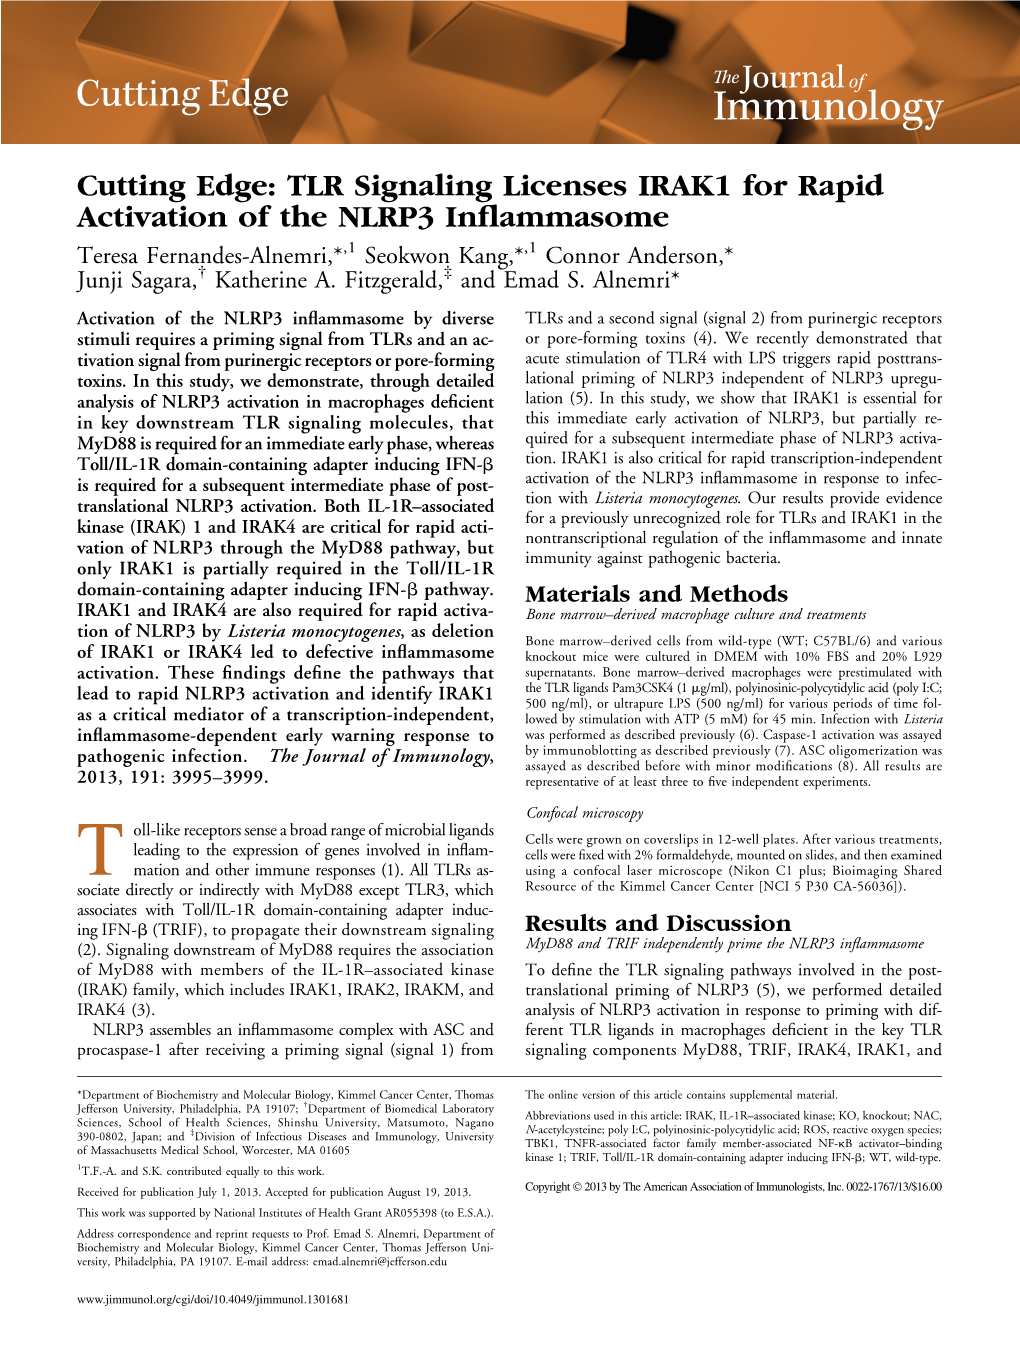 Inflammasome IRAK1 for Rapid Activation of the NLRP3 Cutting Edge